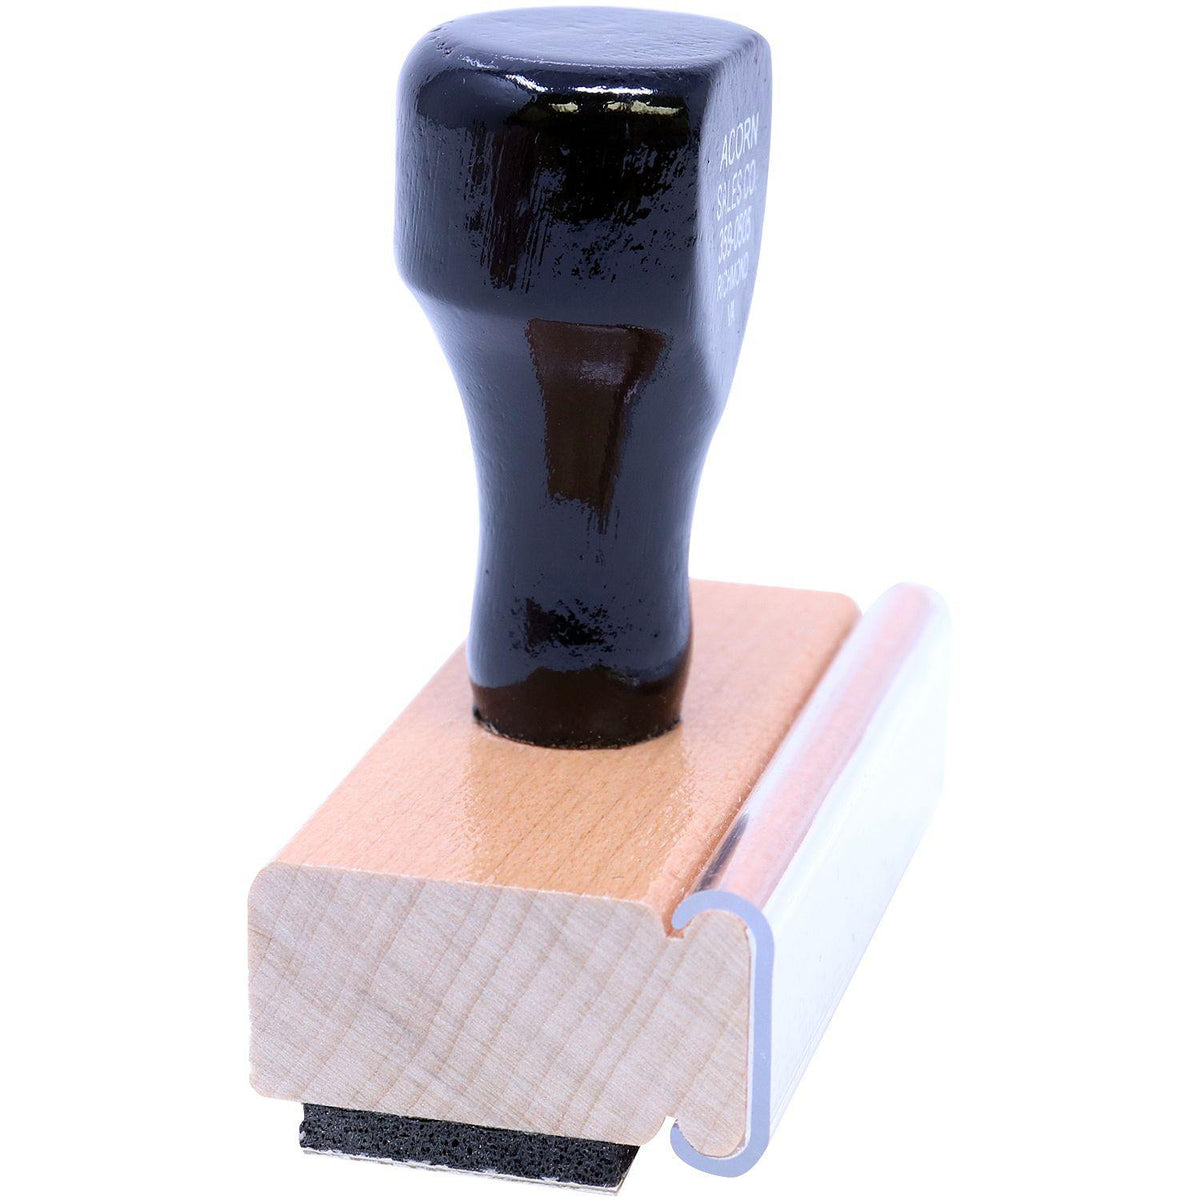 Side View of Amazing Rubber Stamp at an Angle